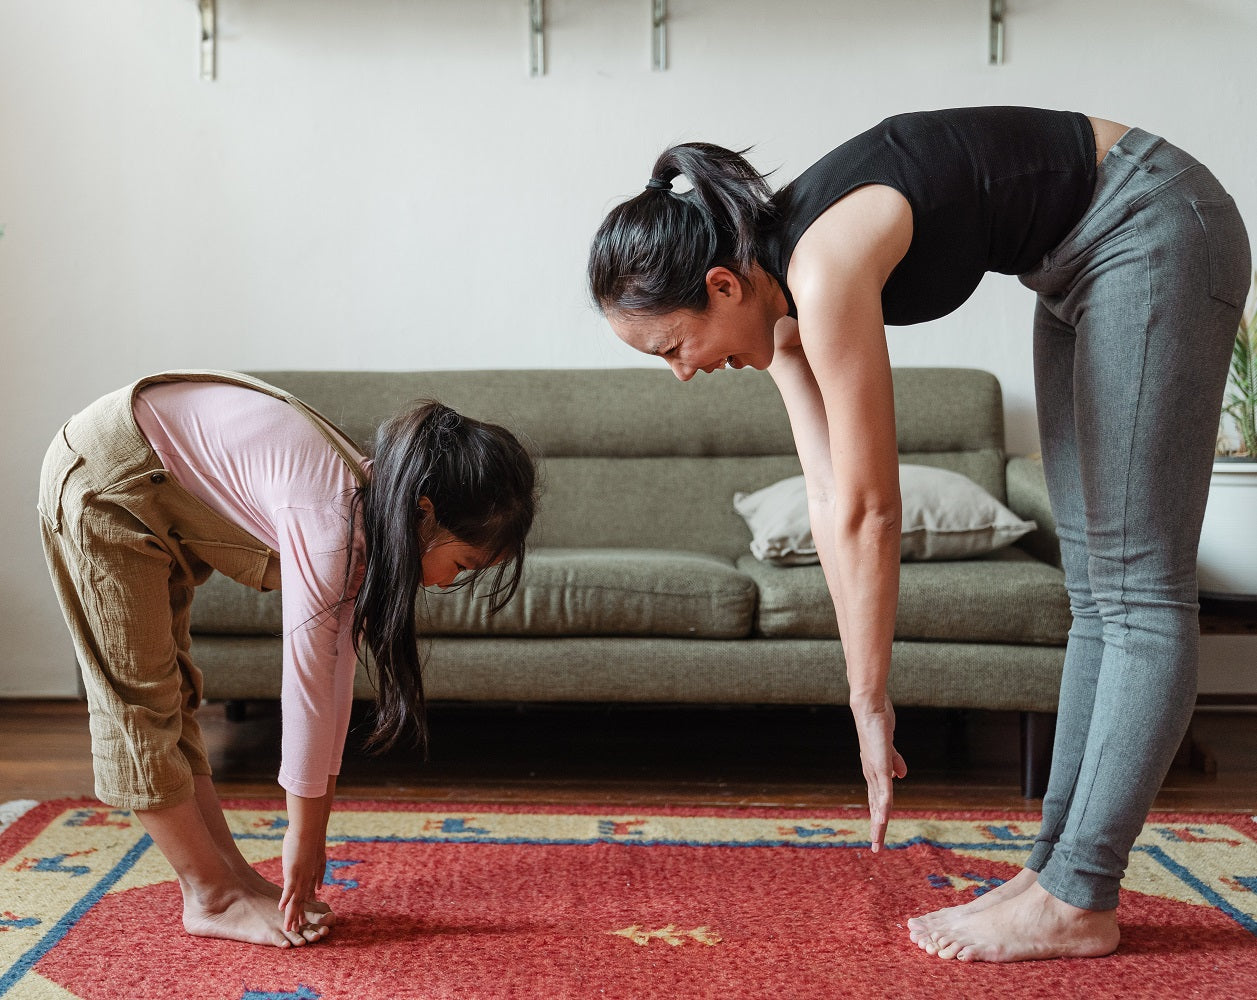 Mother with daughter stretching on the carpet in the living room next to the sofa